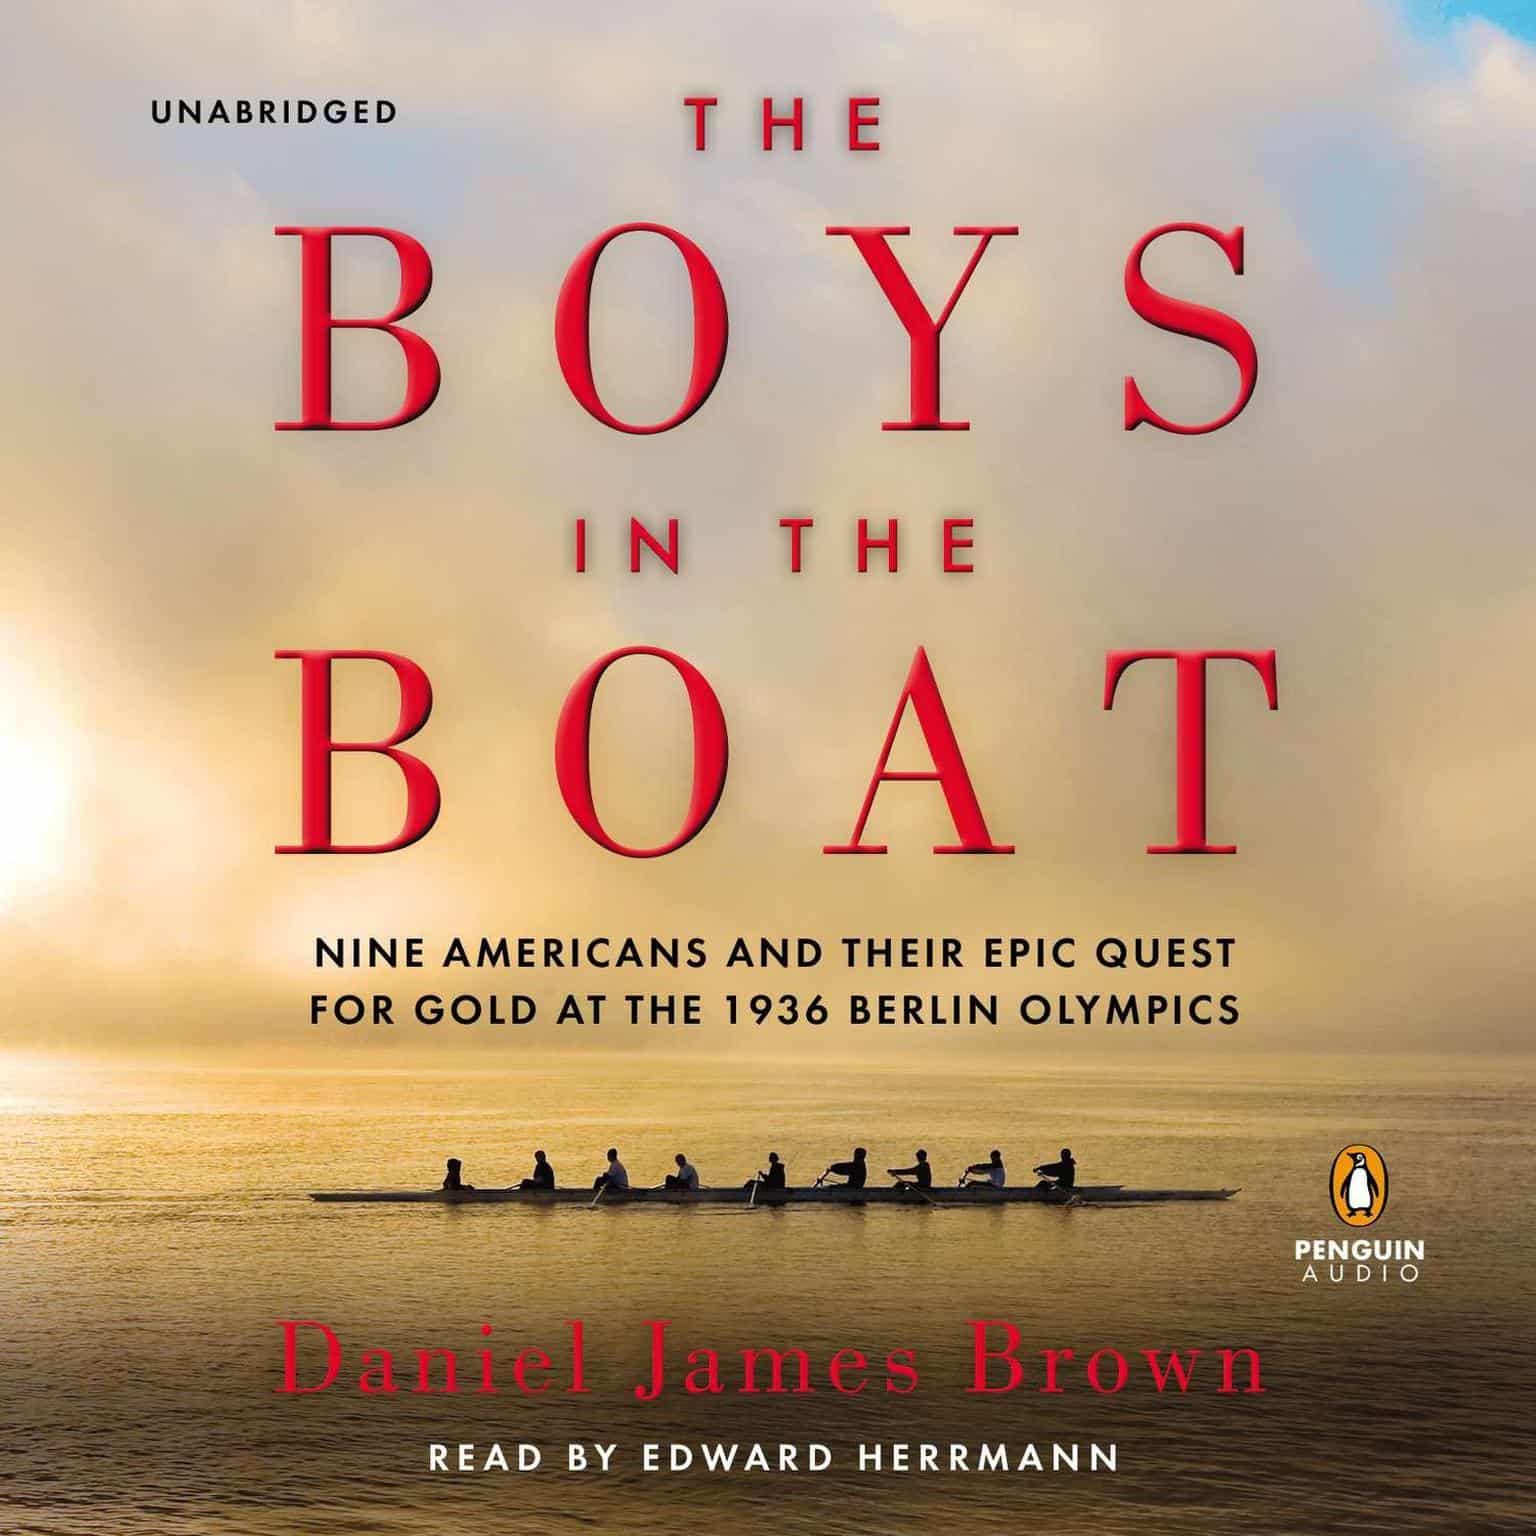 Is The Boys In The Boat A True Story?